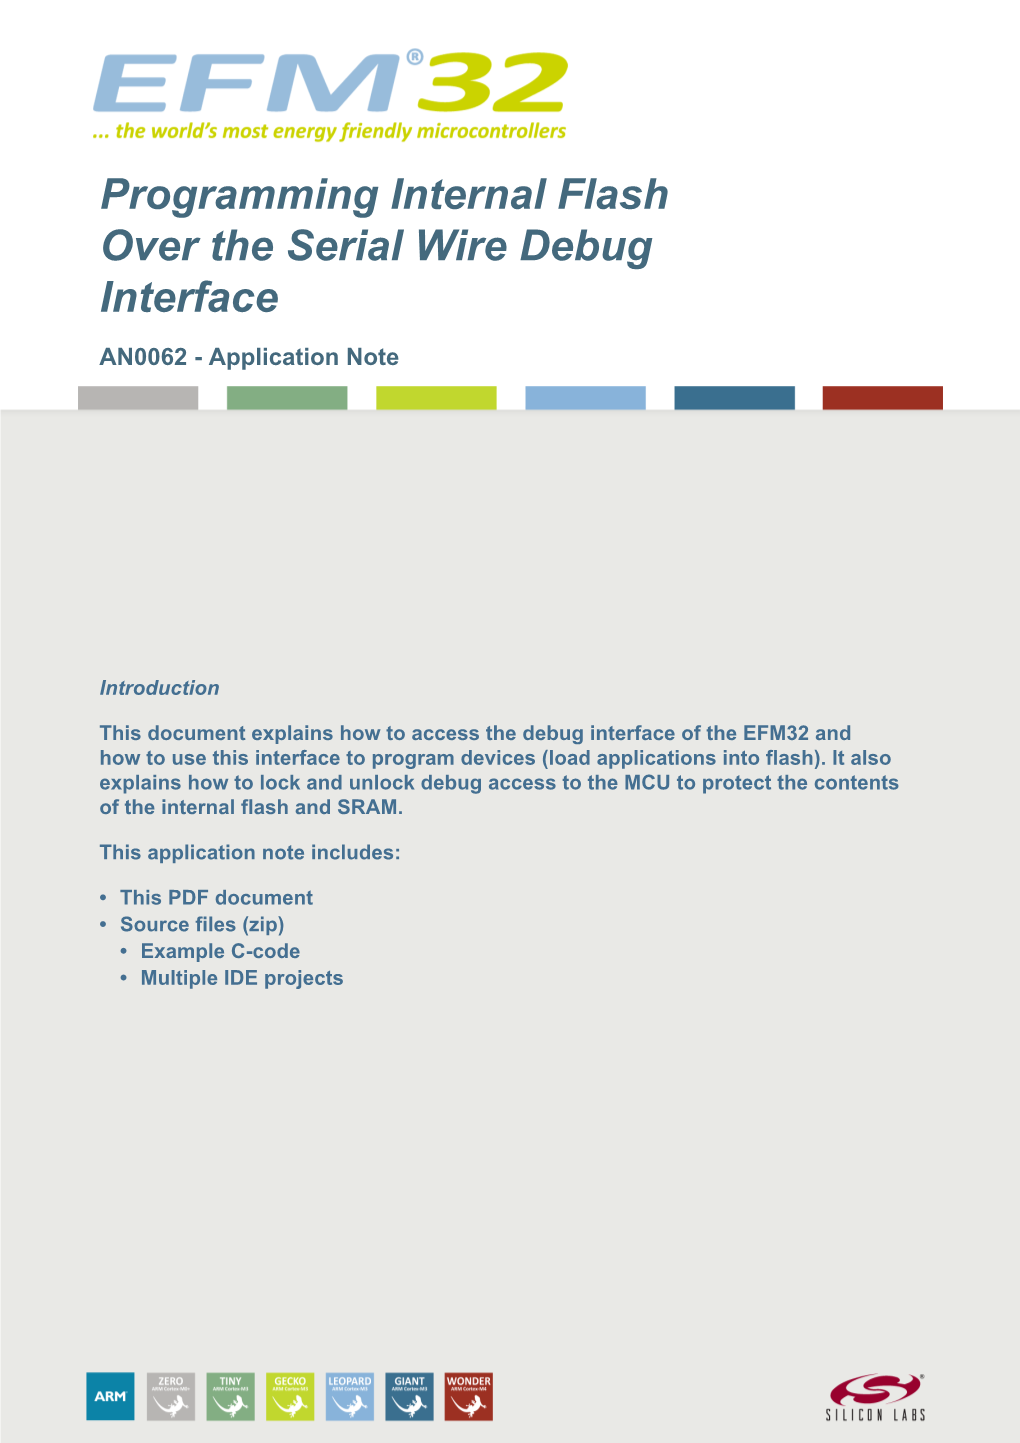 AN0062: Programming Internal Flash Over the Serial Wire Debug Interface